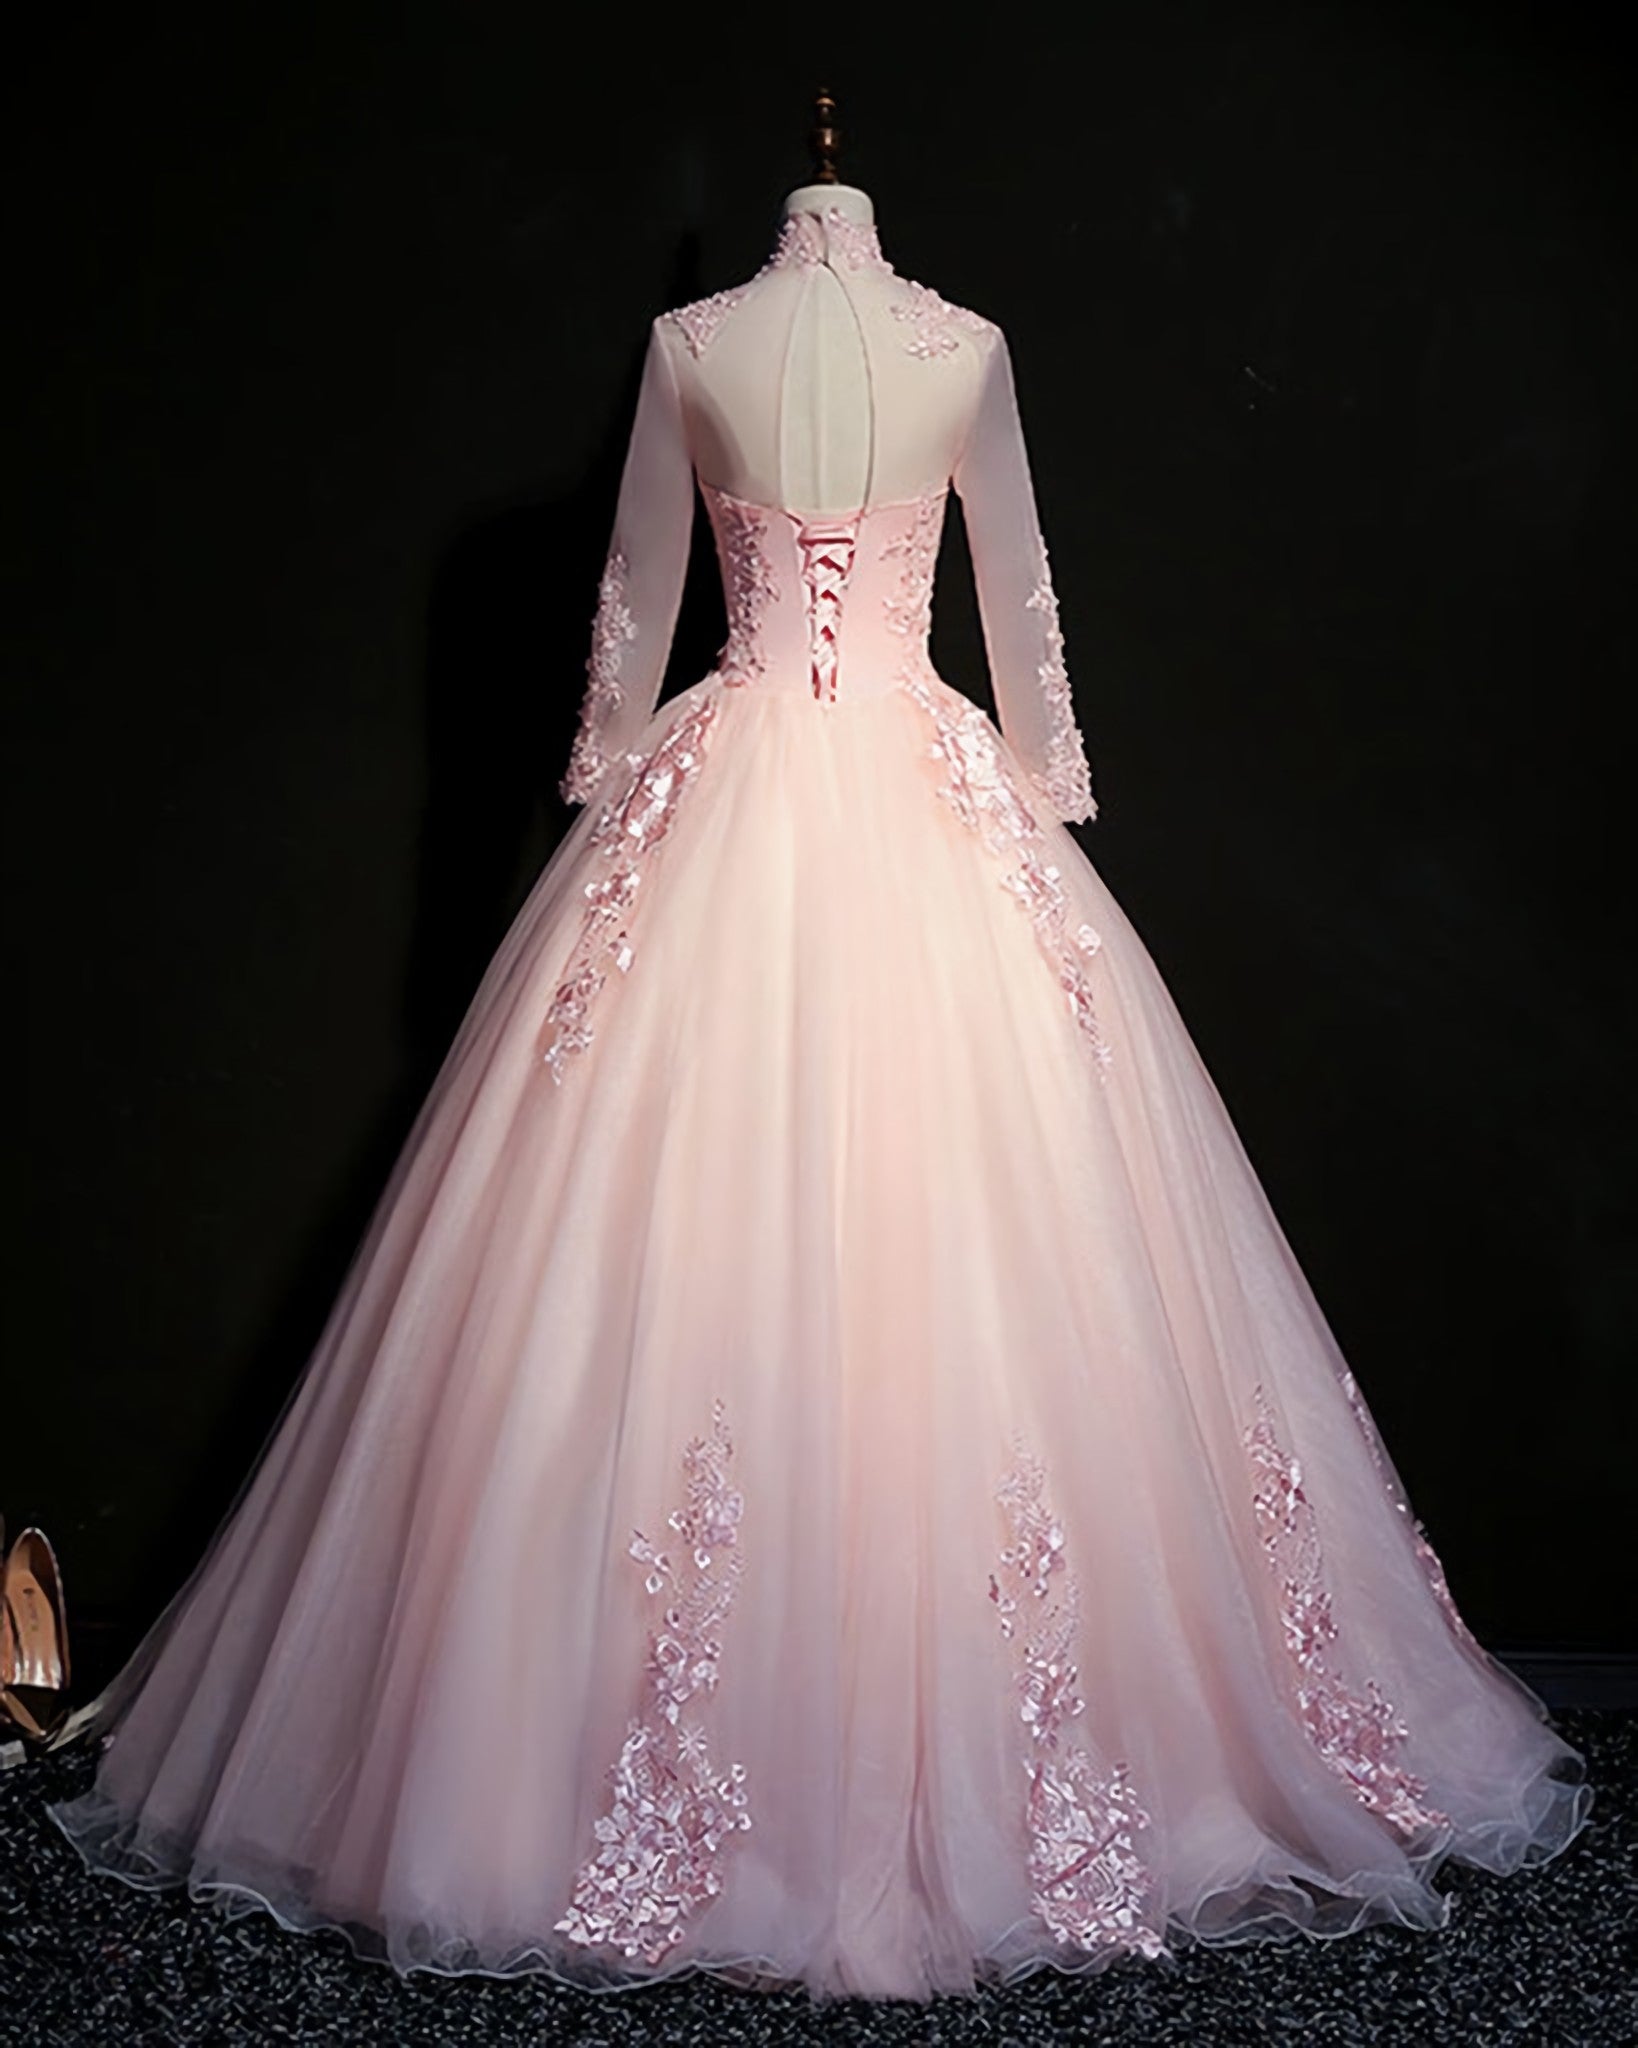 Prom Dresses Ball Gown Style, Pink Tulle Beaded Long Lace Applique Formal Prom Dress, Evening Dress, With Sleeve